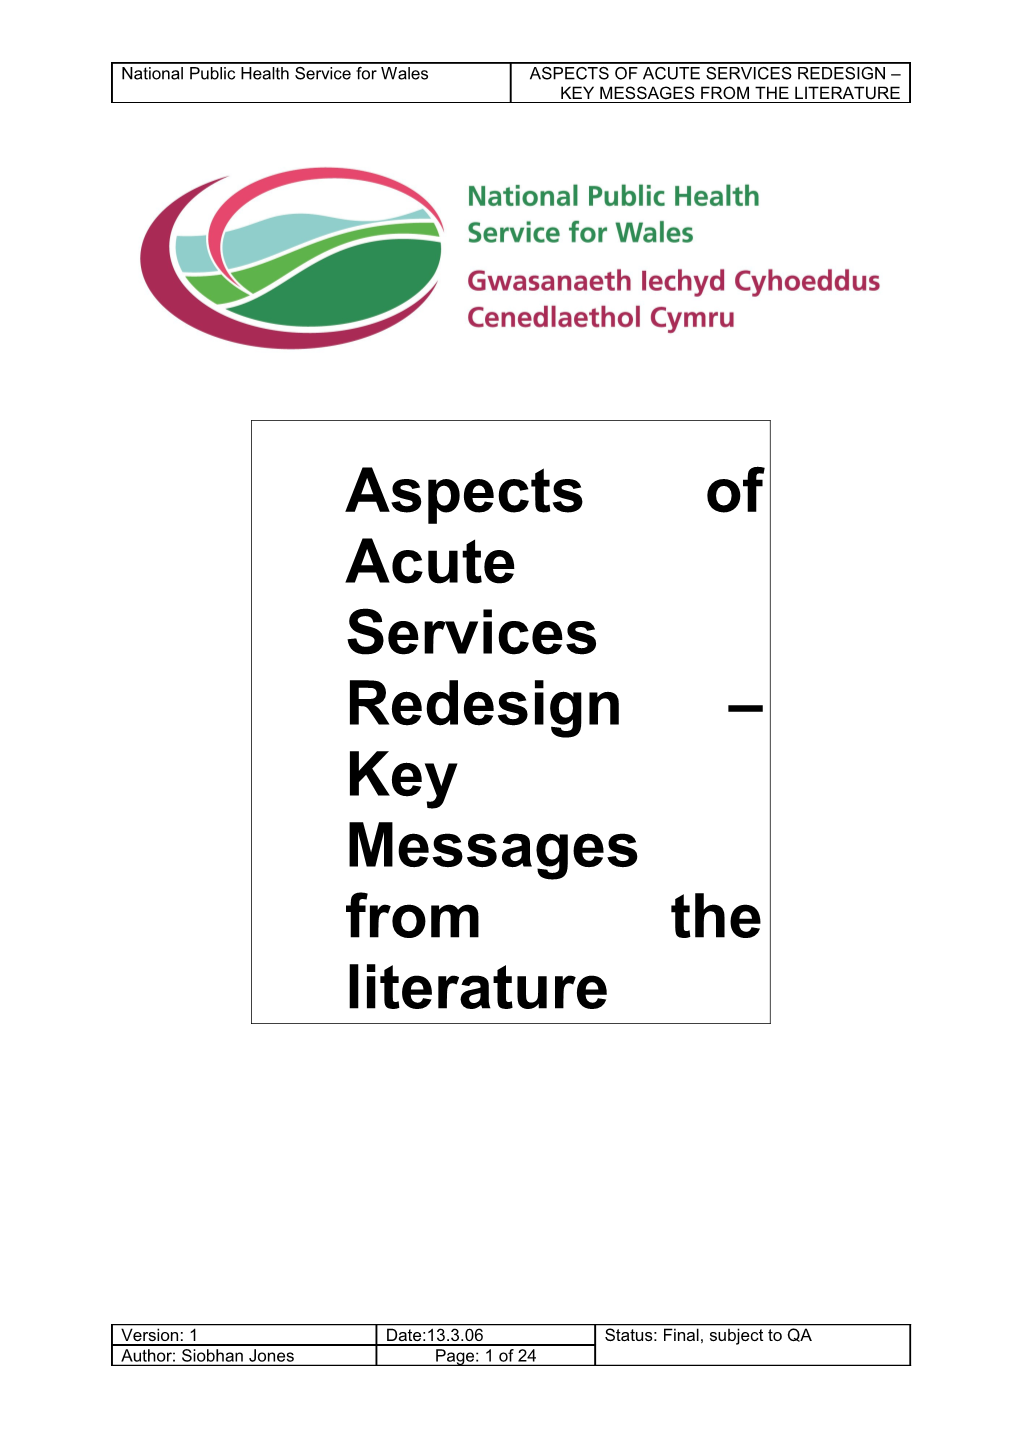 Aspects of Acute Services Redesign Key Messages from the Literature